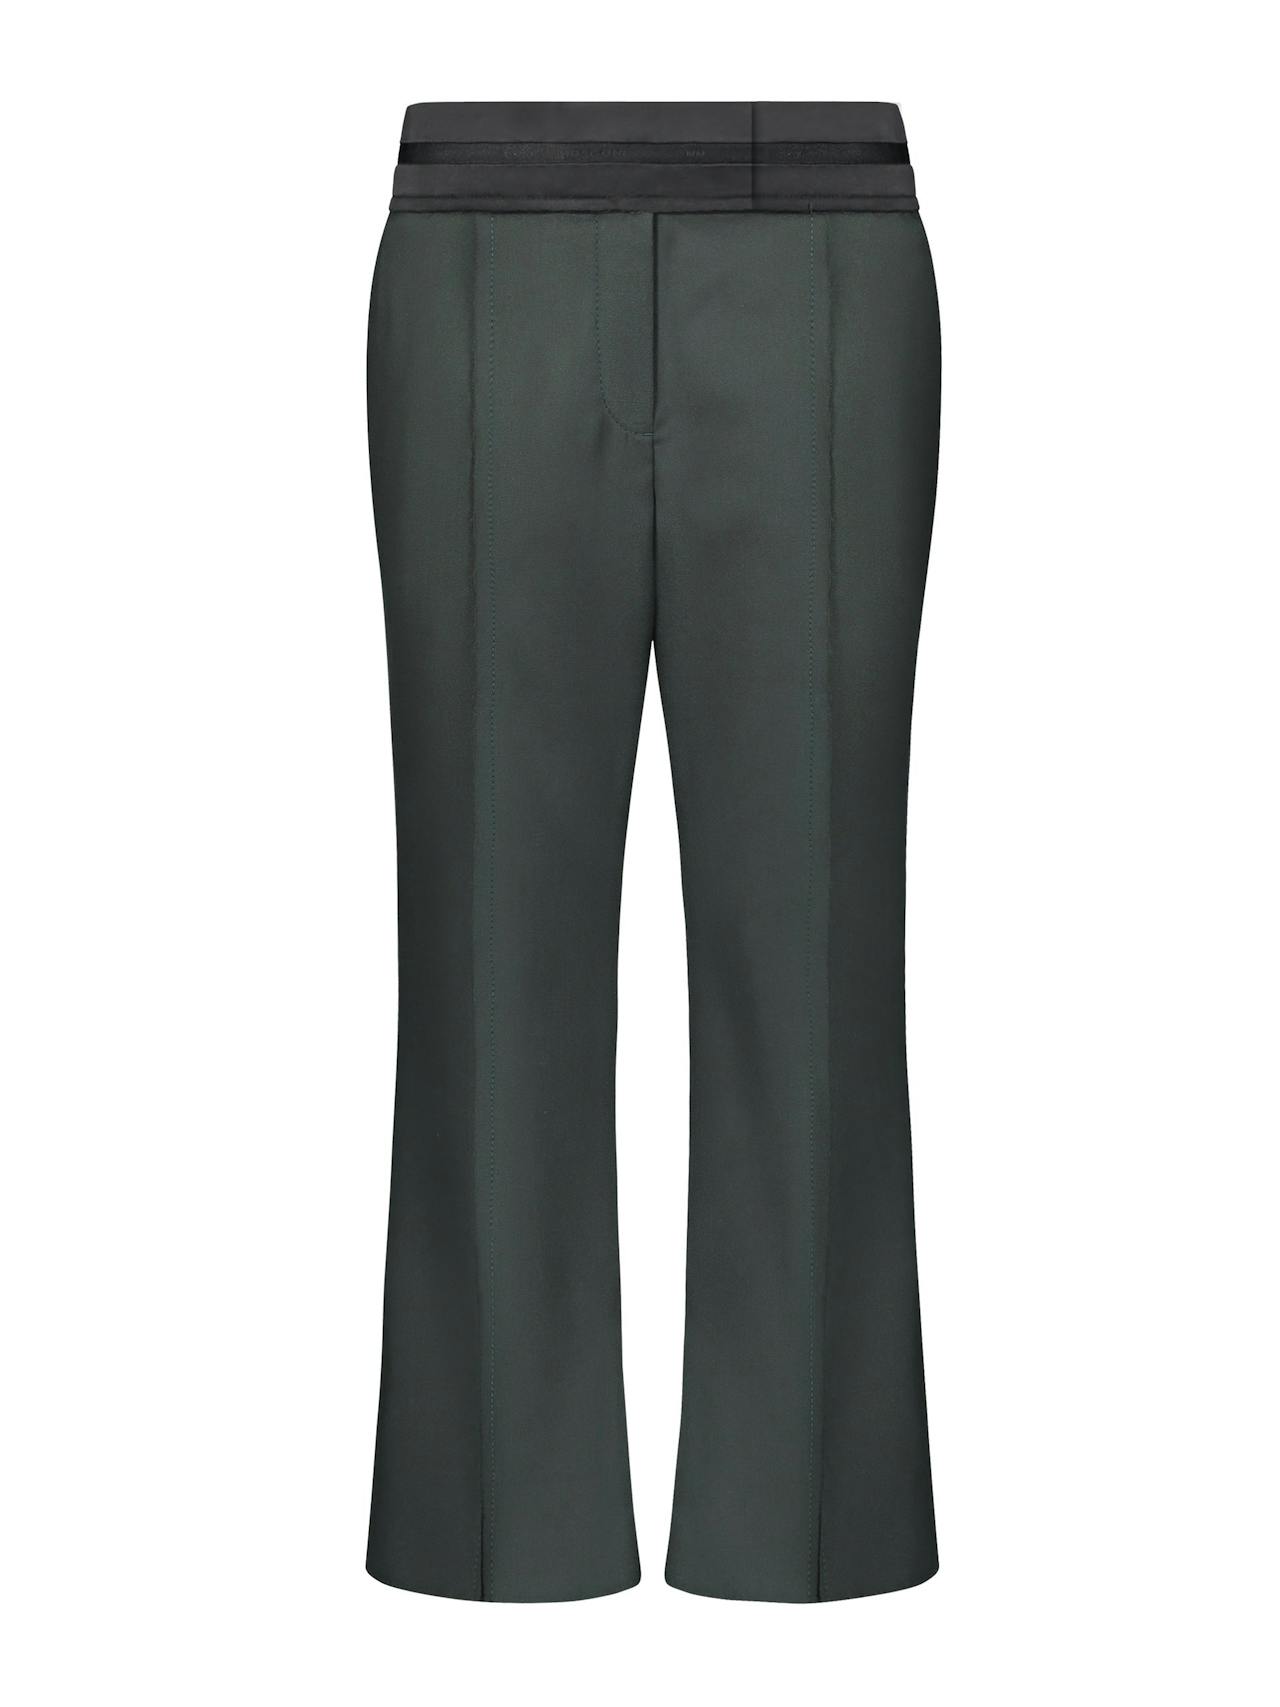 Verde Apli cropped flare trouser with slit